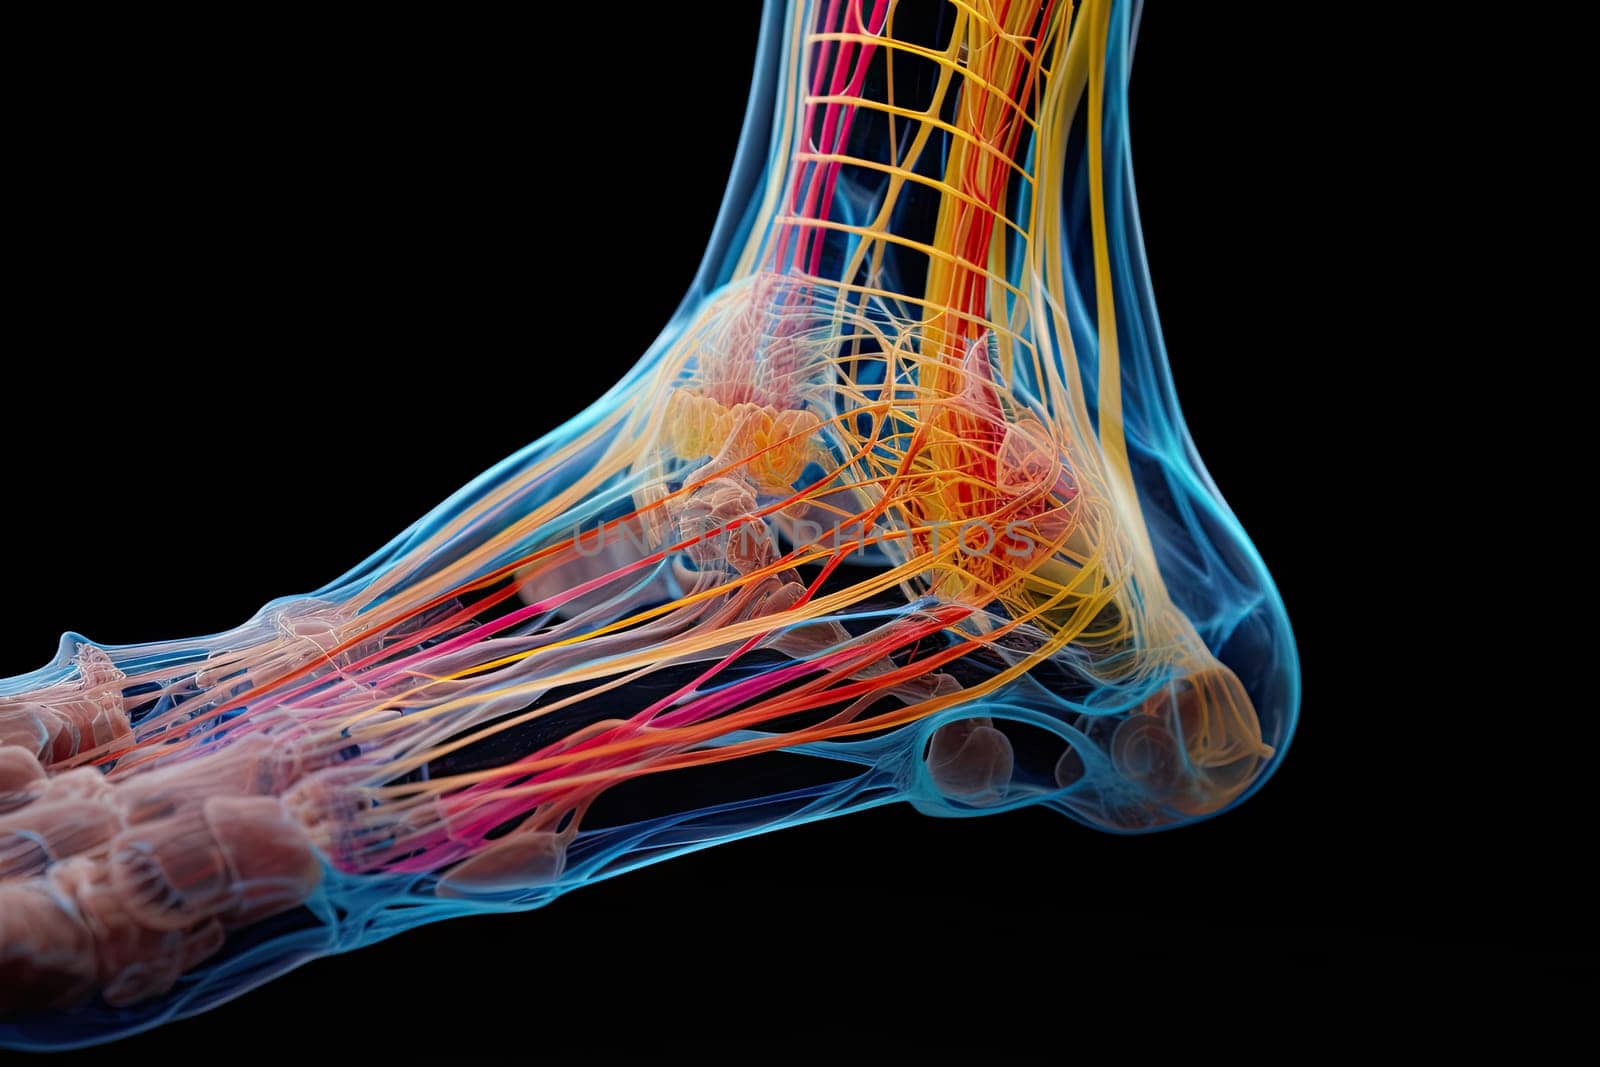 The Vibrant Canvas: A Colorful Artistic Interpretation of a Person's Foot Created With Generative AI Technology